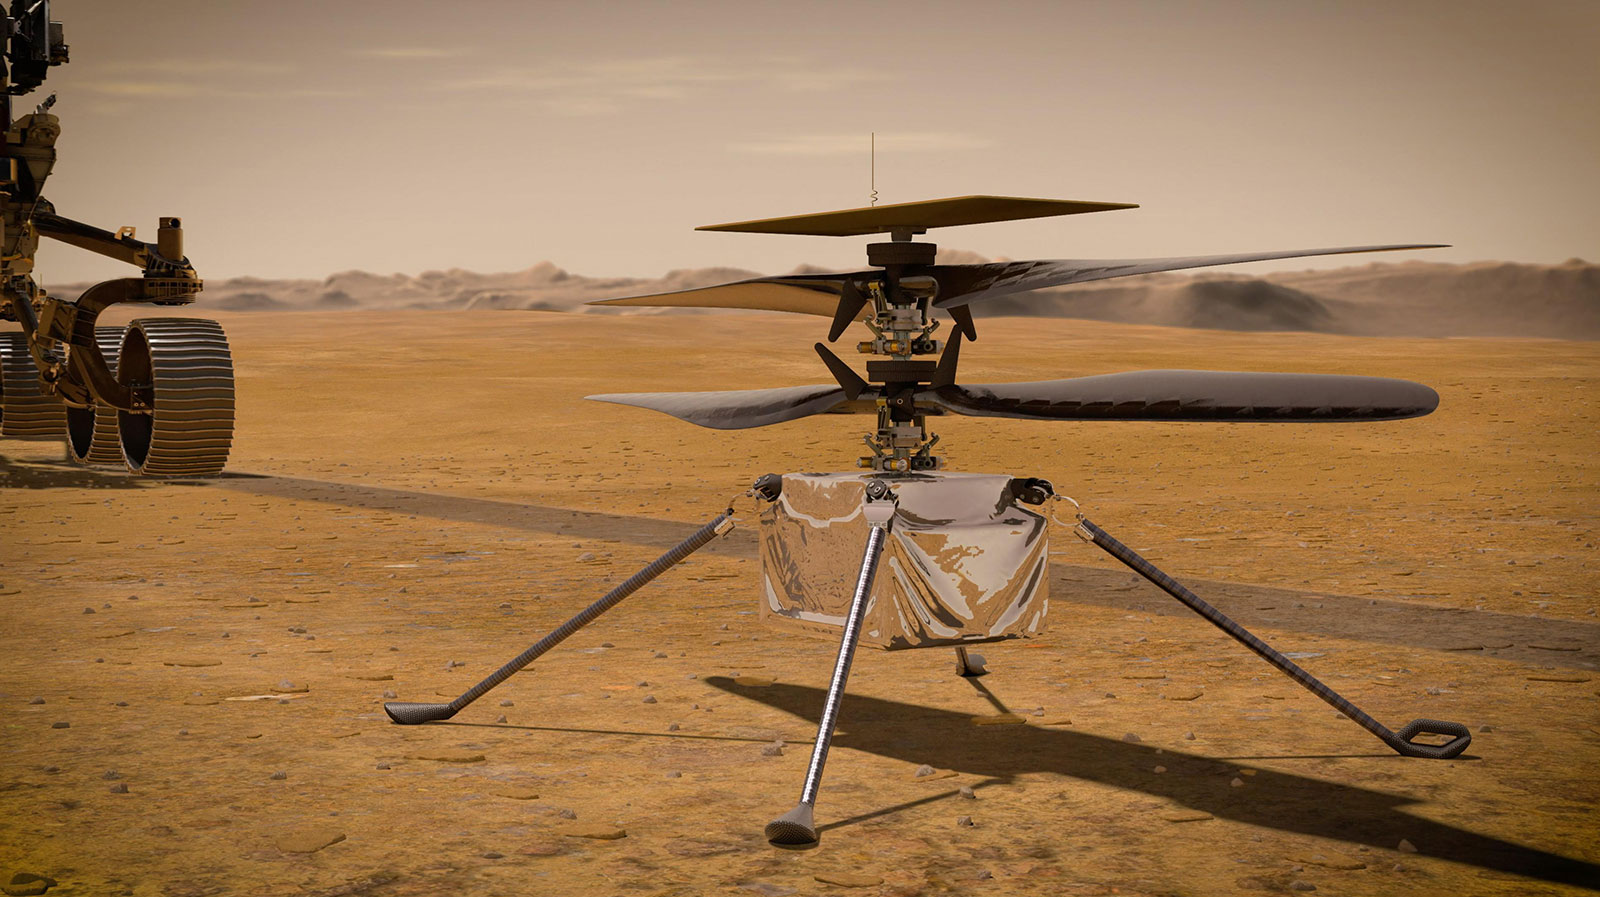 n this illustration, NASA's Ingenuity Mars Helicopter stands on the Red Planet's surface